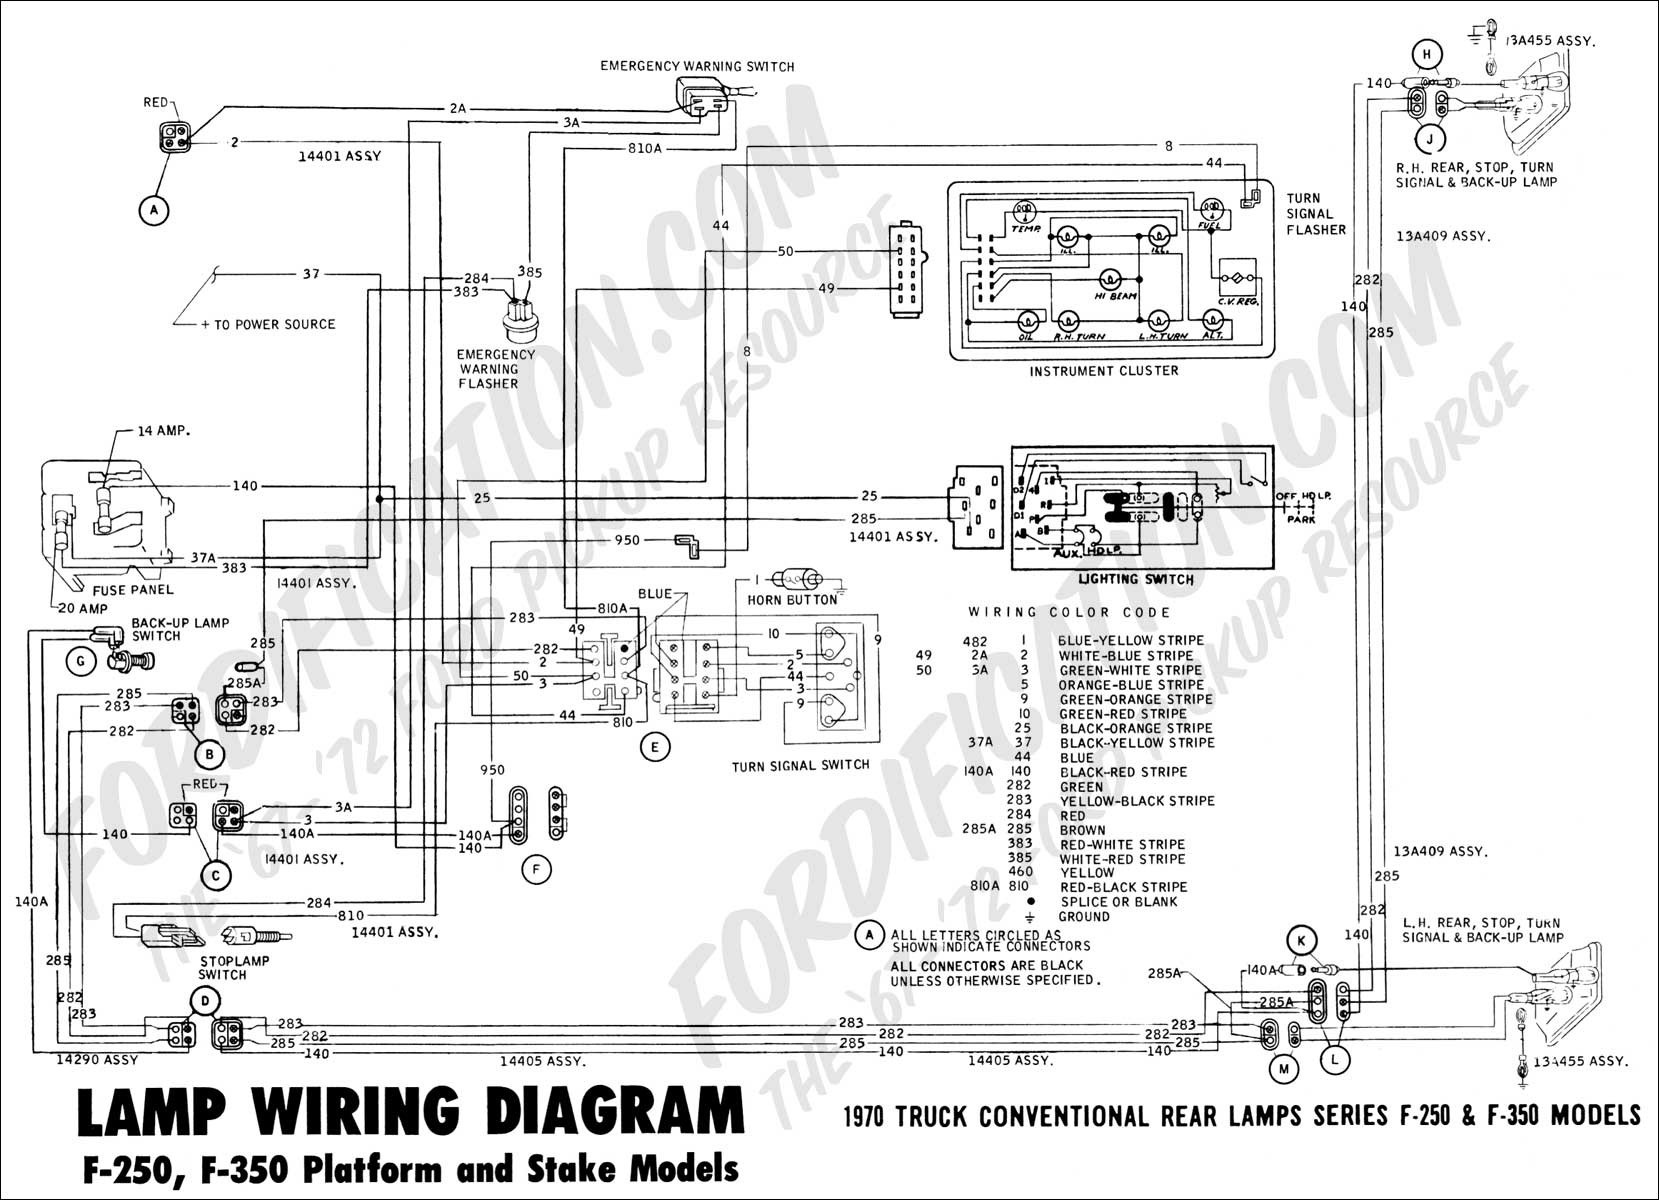 1986 ford F350 Wiring Diagram ford Truck Technical Drawings and Schematics Section H Wiring Of 1986 ford F350 Wiring Diagram